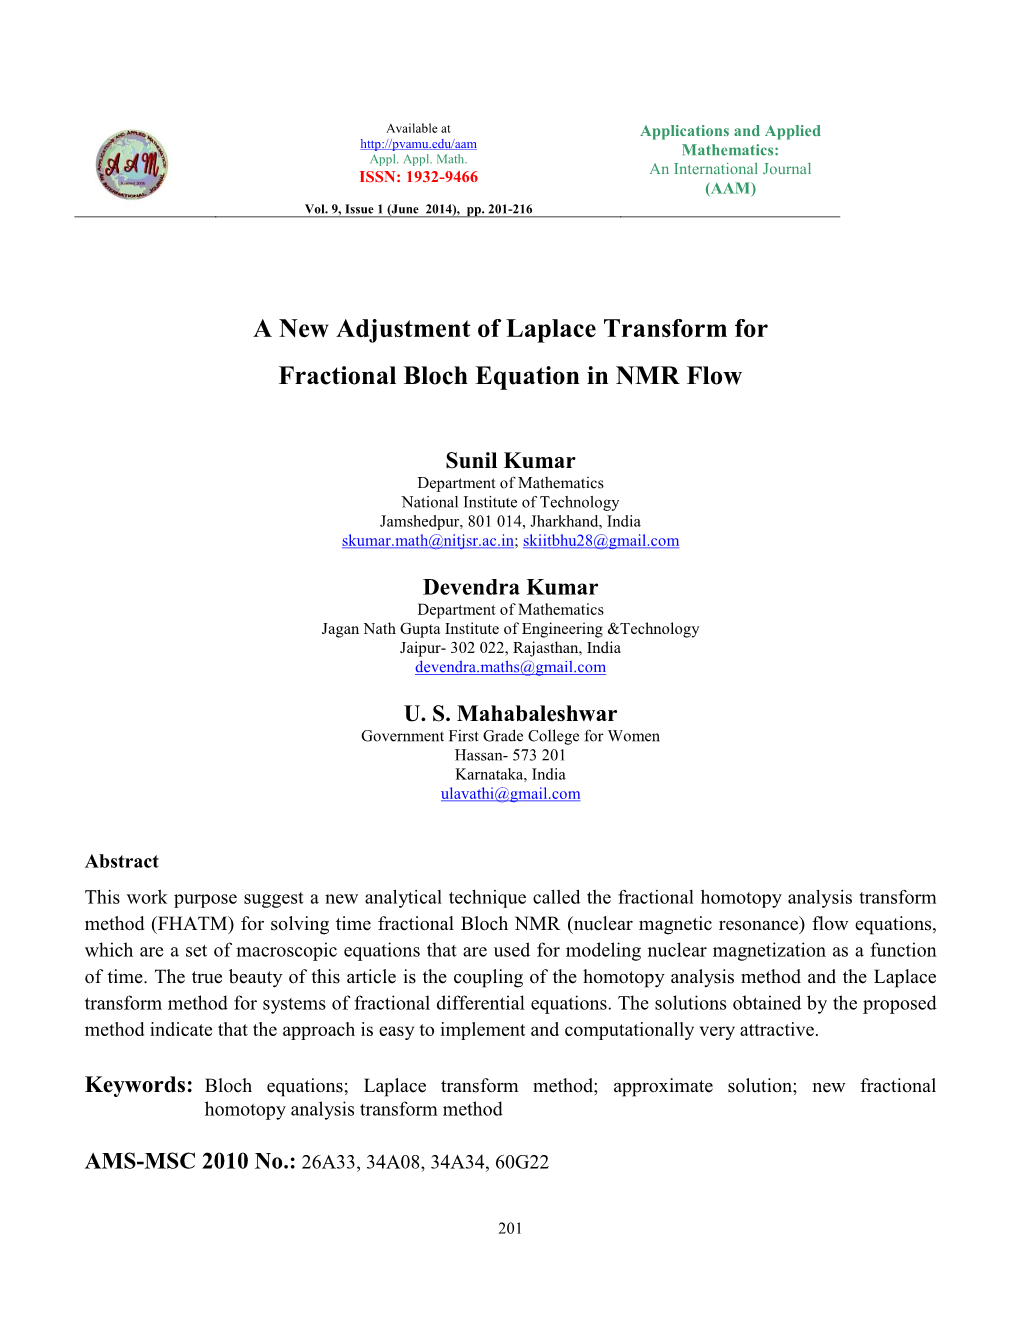 A New Adjustment of Laplace Transform for Fractional Bloch Equation in NMR Flow